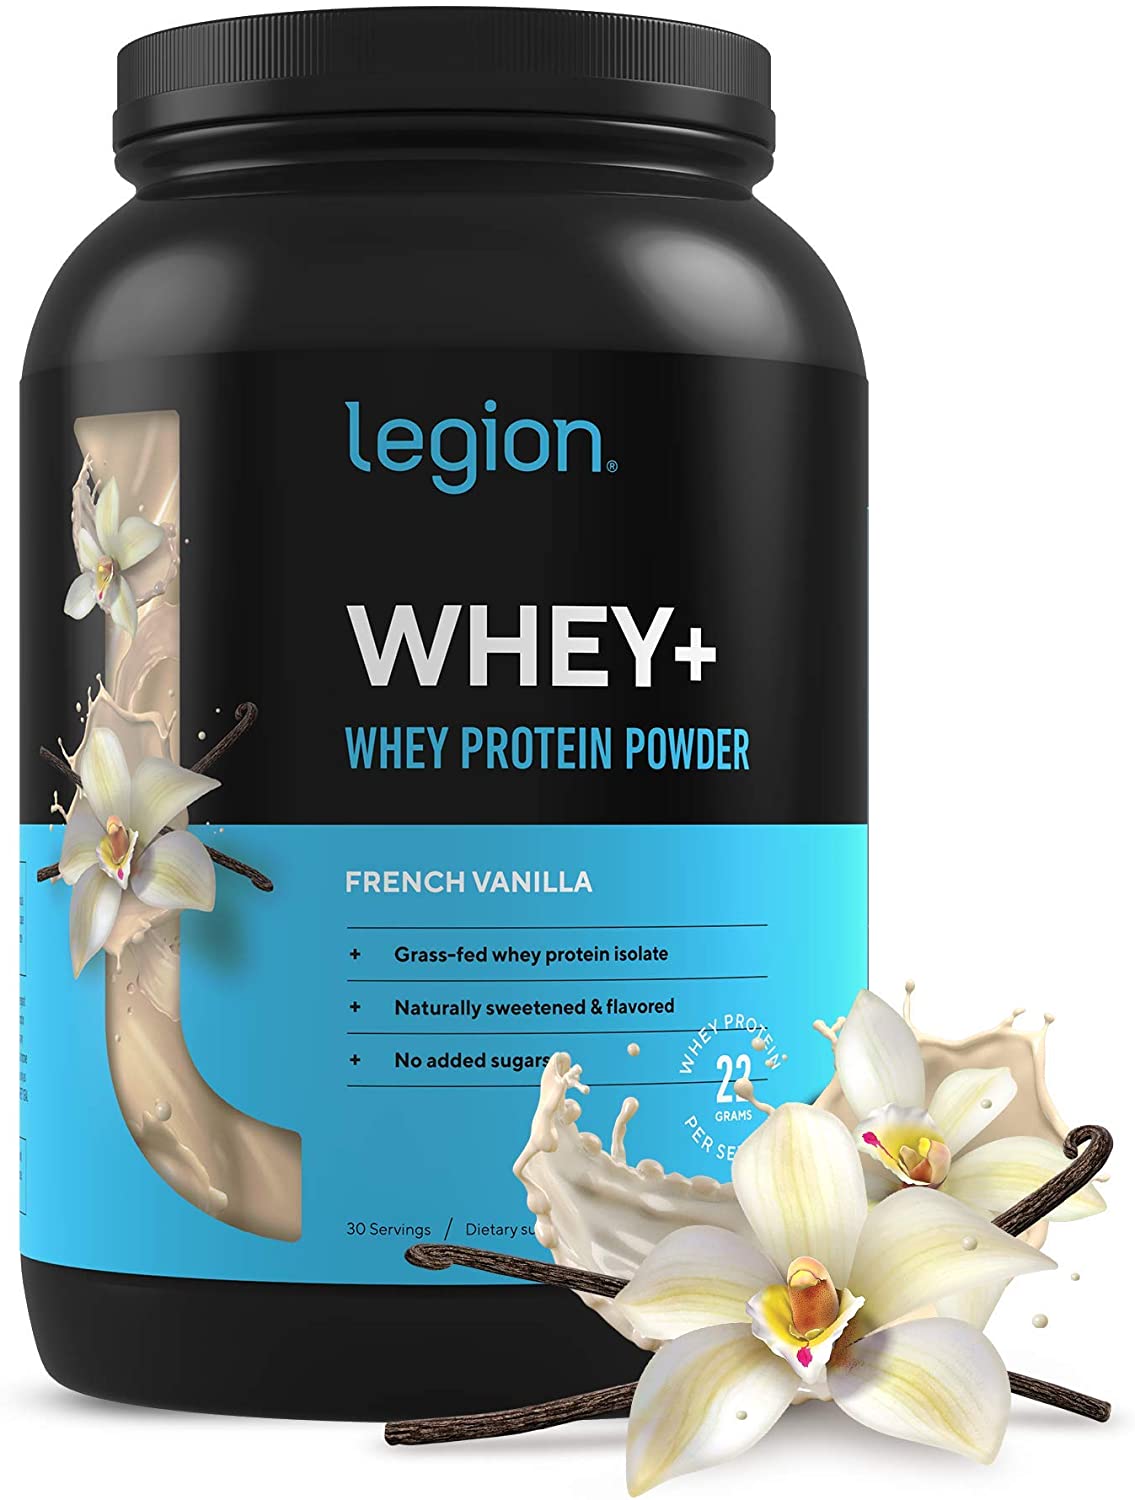 Legion Whey Protein Review